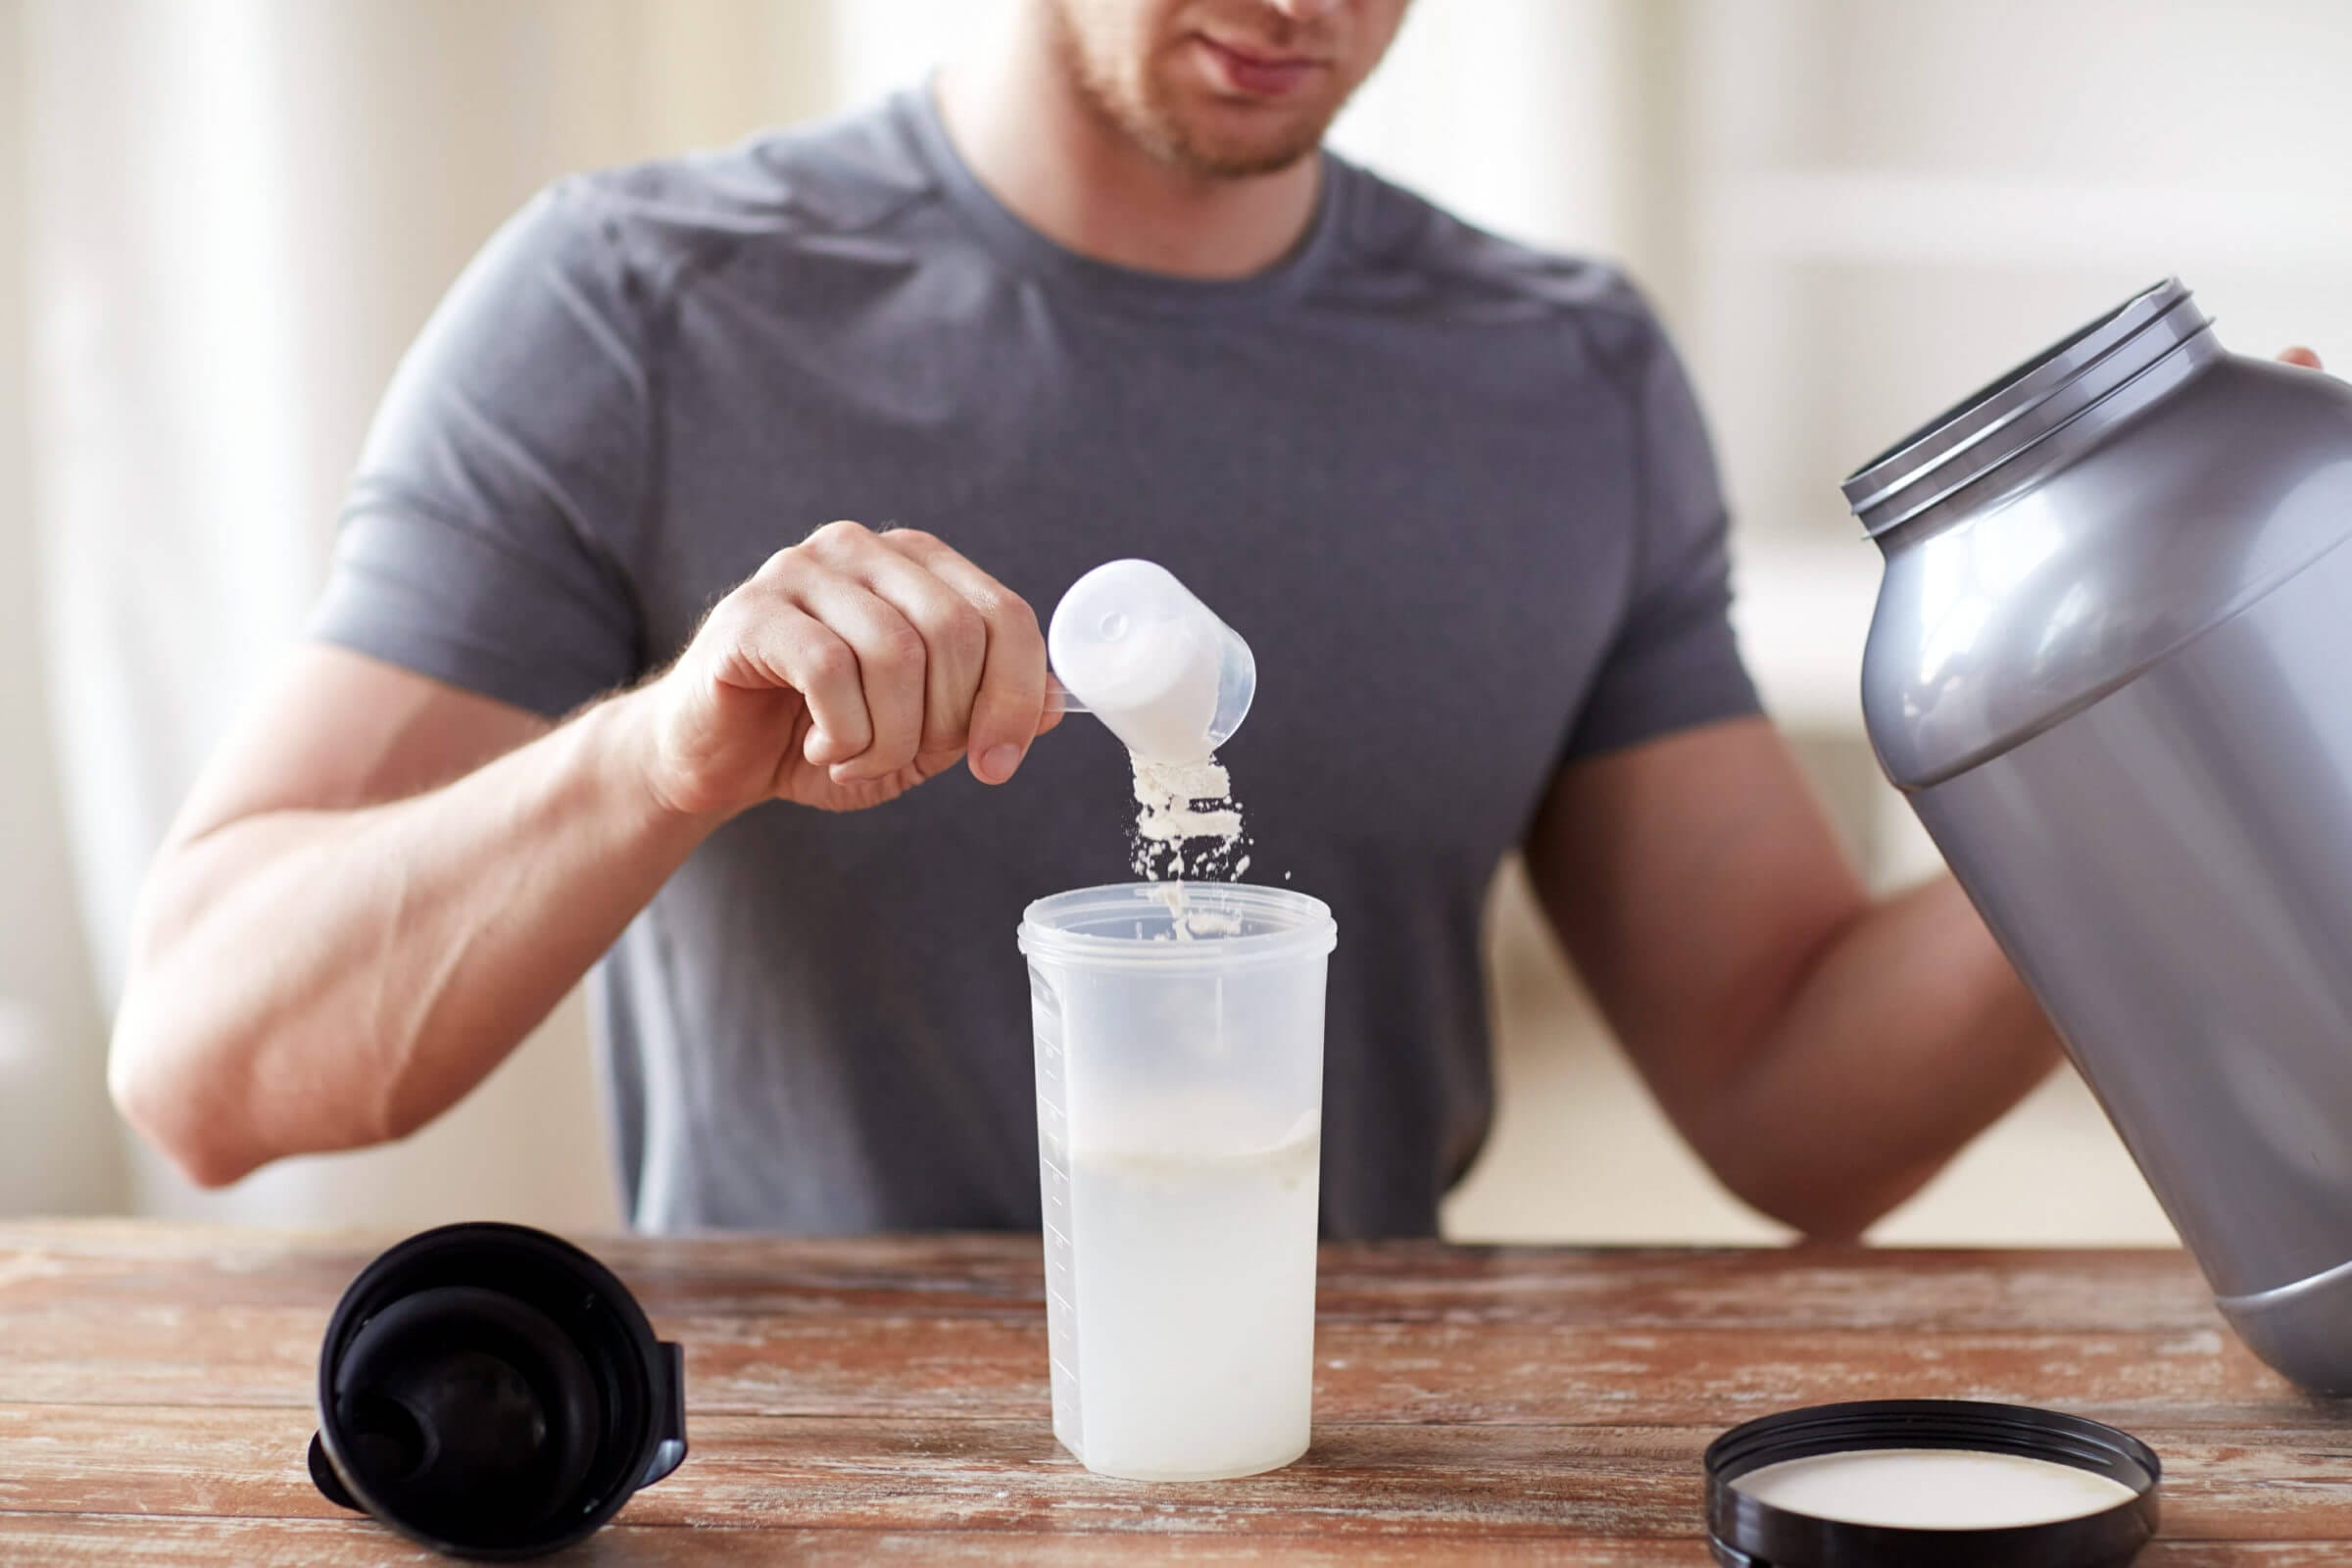 How to choose a plant-based protein powder